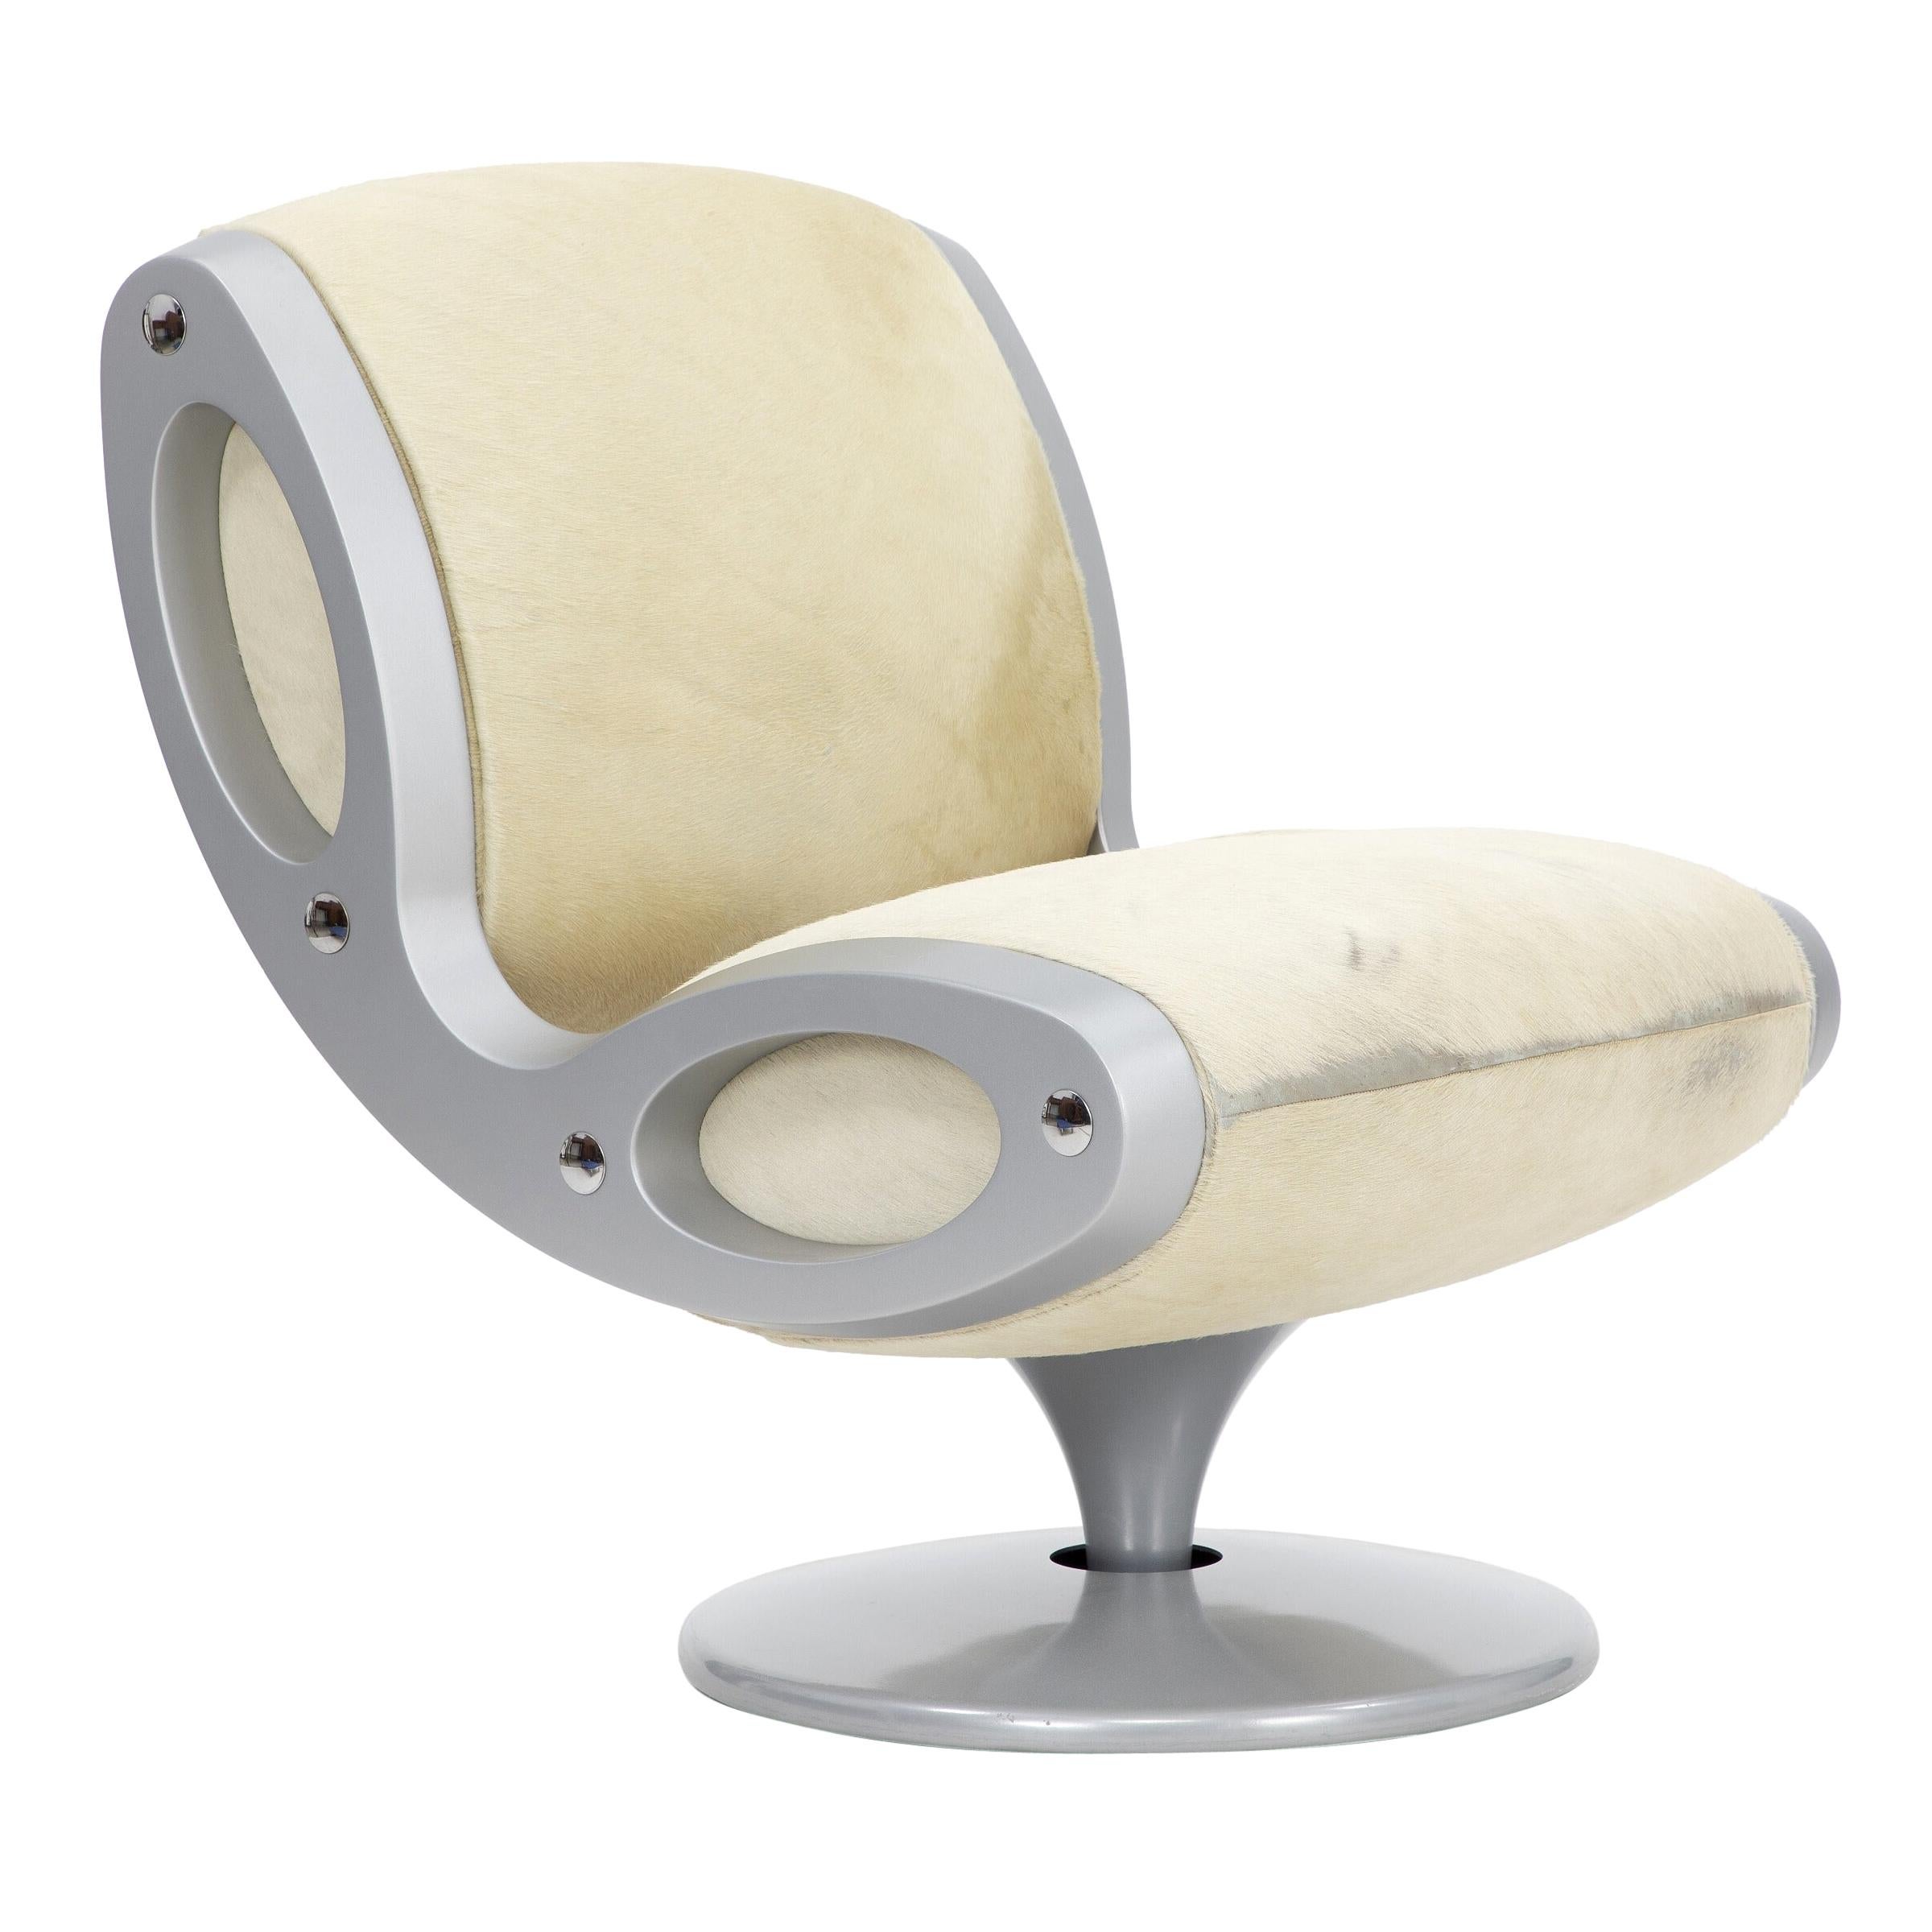 1990s Gluon Lounge Swivel Chair in Pony Hair by Marc Newson for Moroso